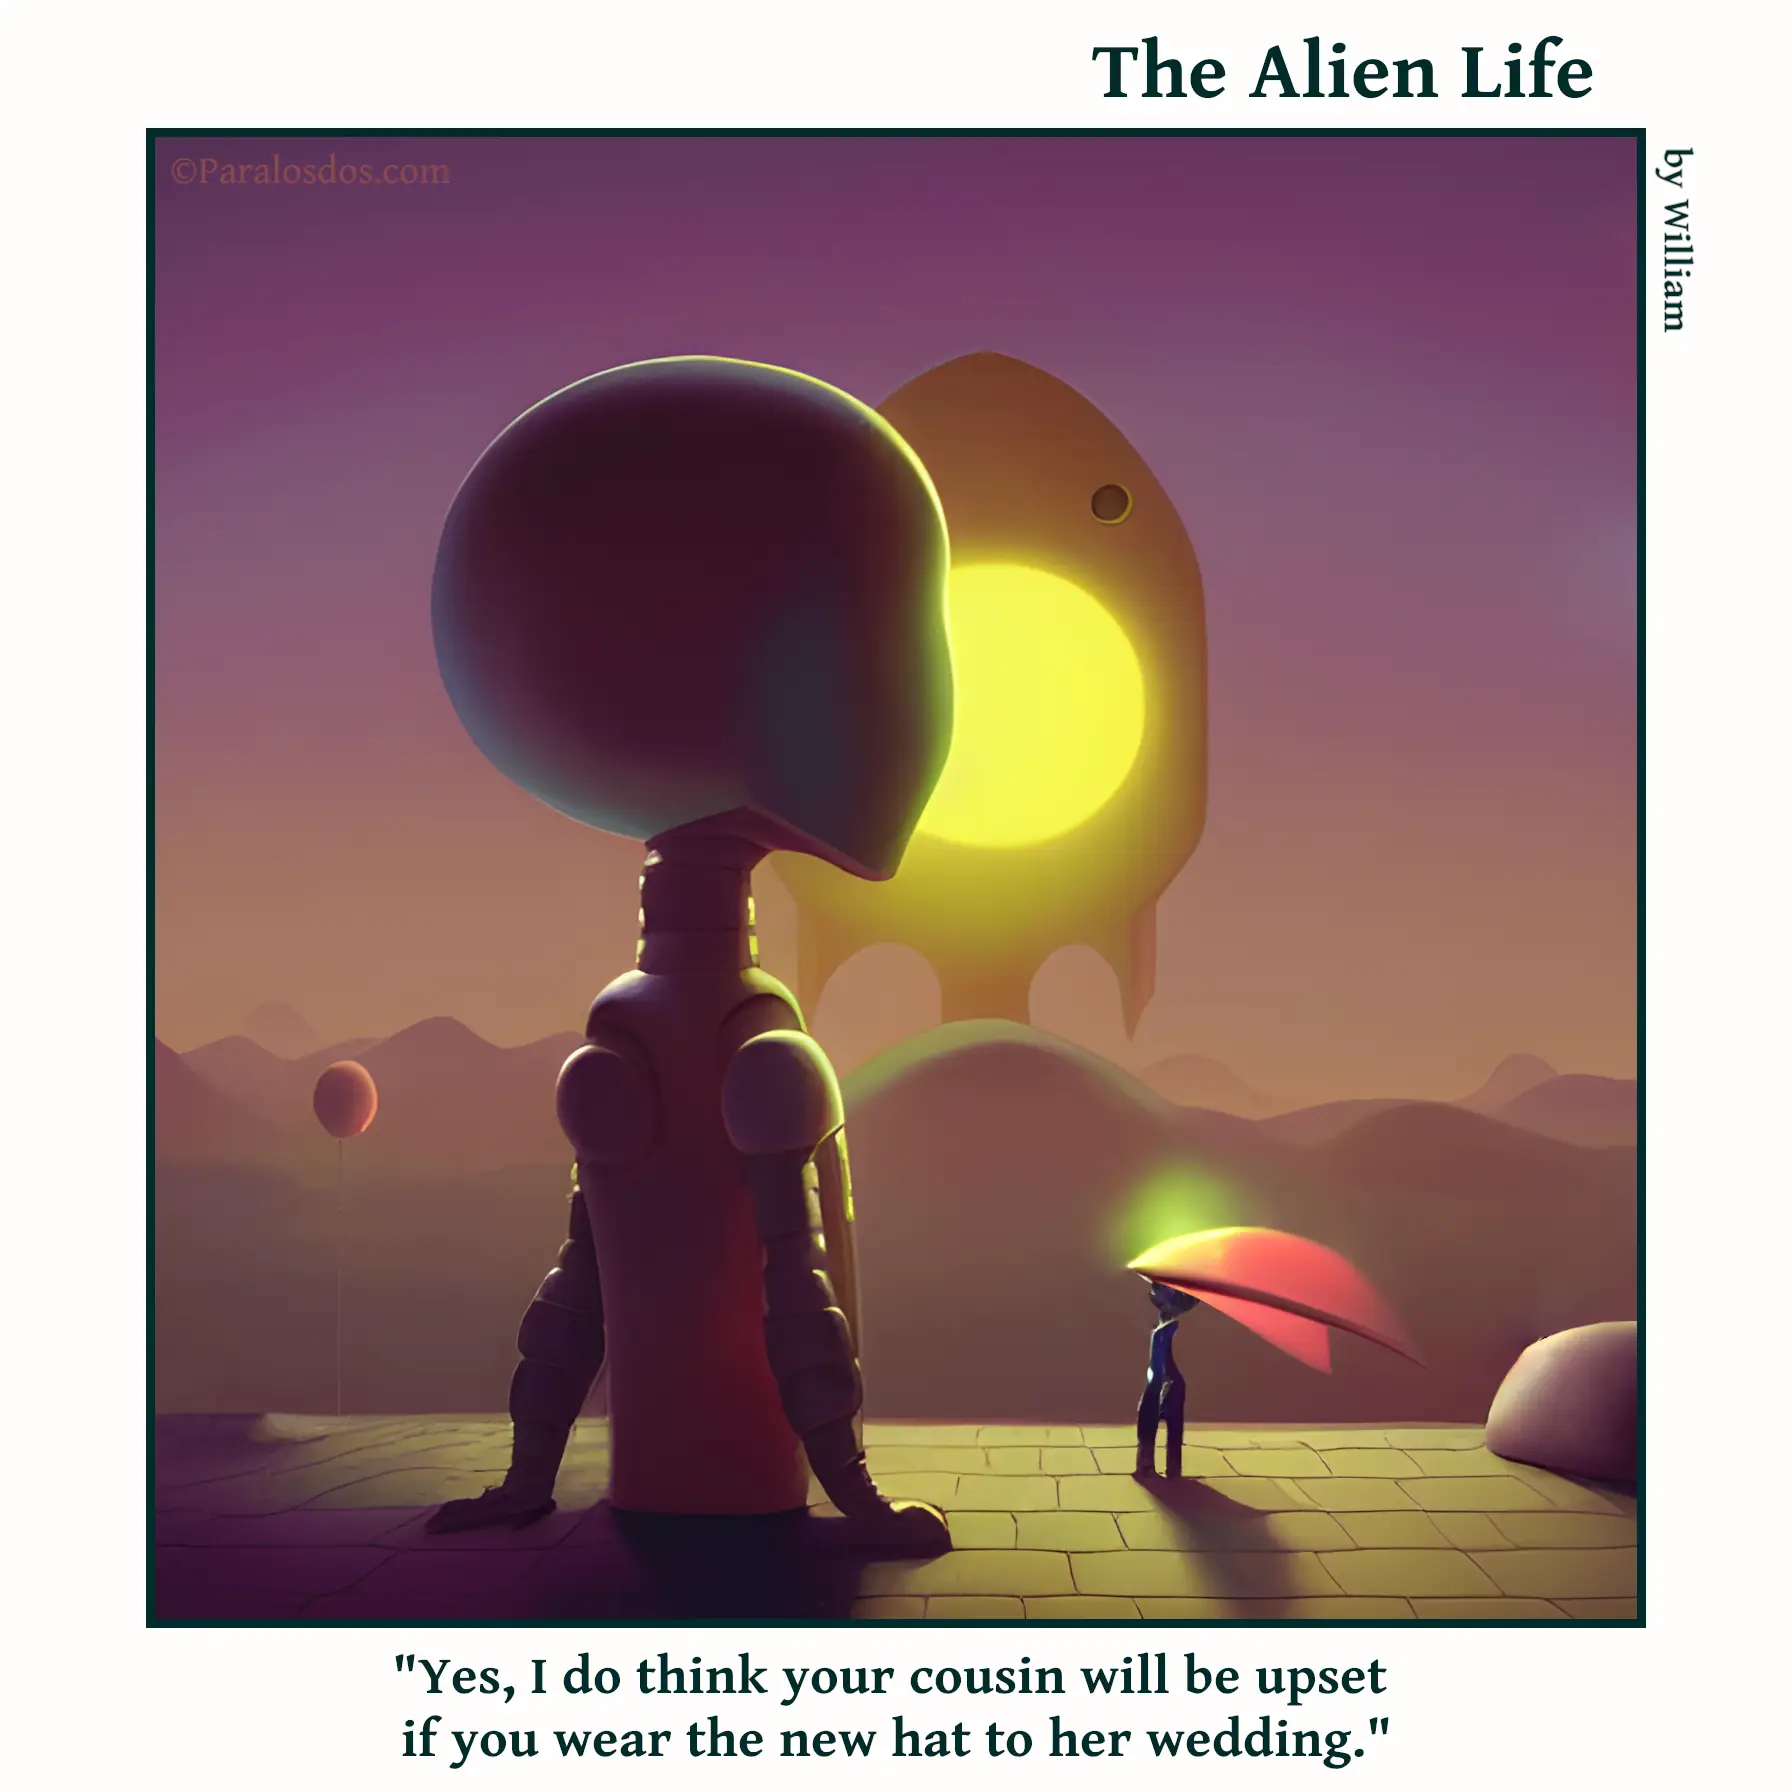 The Alien Life, one panel Comic. A little alien is standing beside a huge seated alien. The little alien is wearing an outrageously large and loud hat. The caption reads:"Yes, I do think your cousin will be upset if you wear the new hat to her wedding."